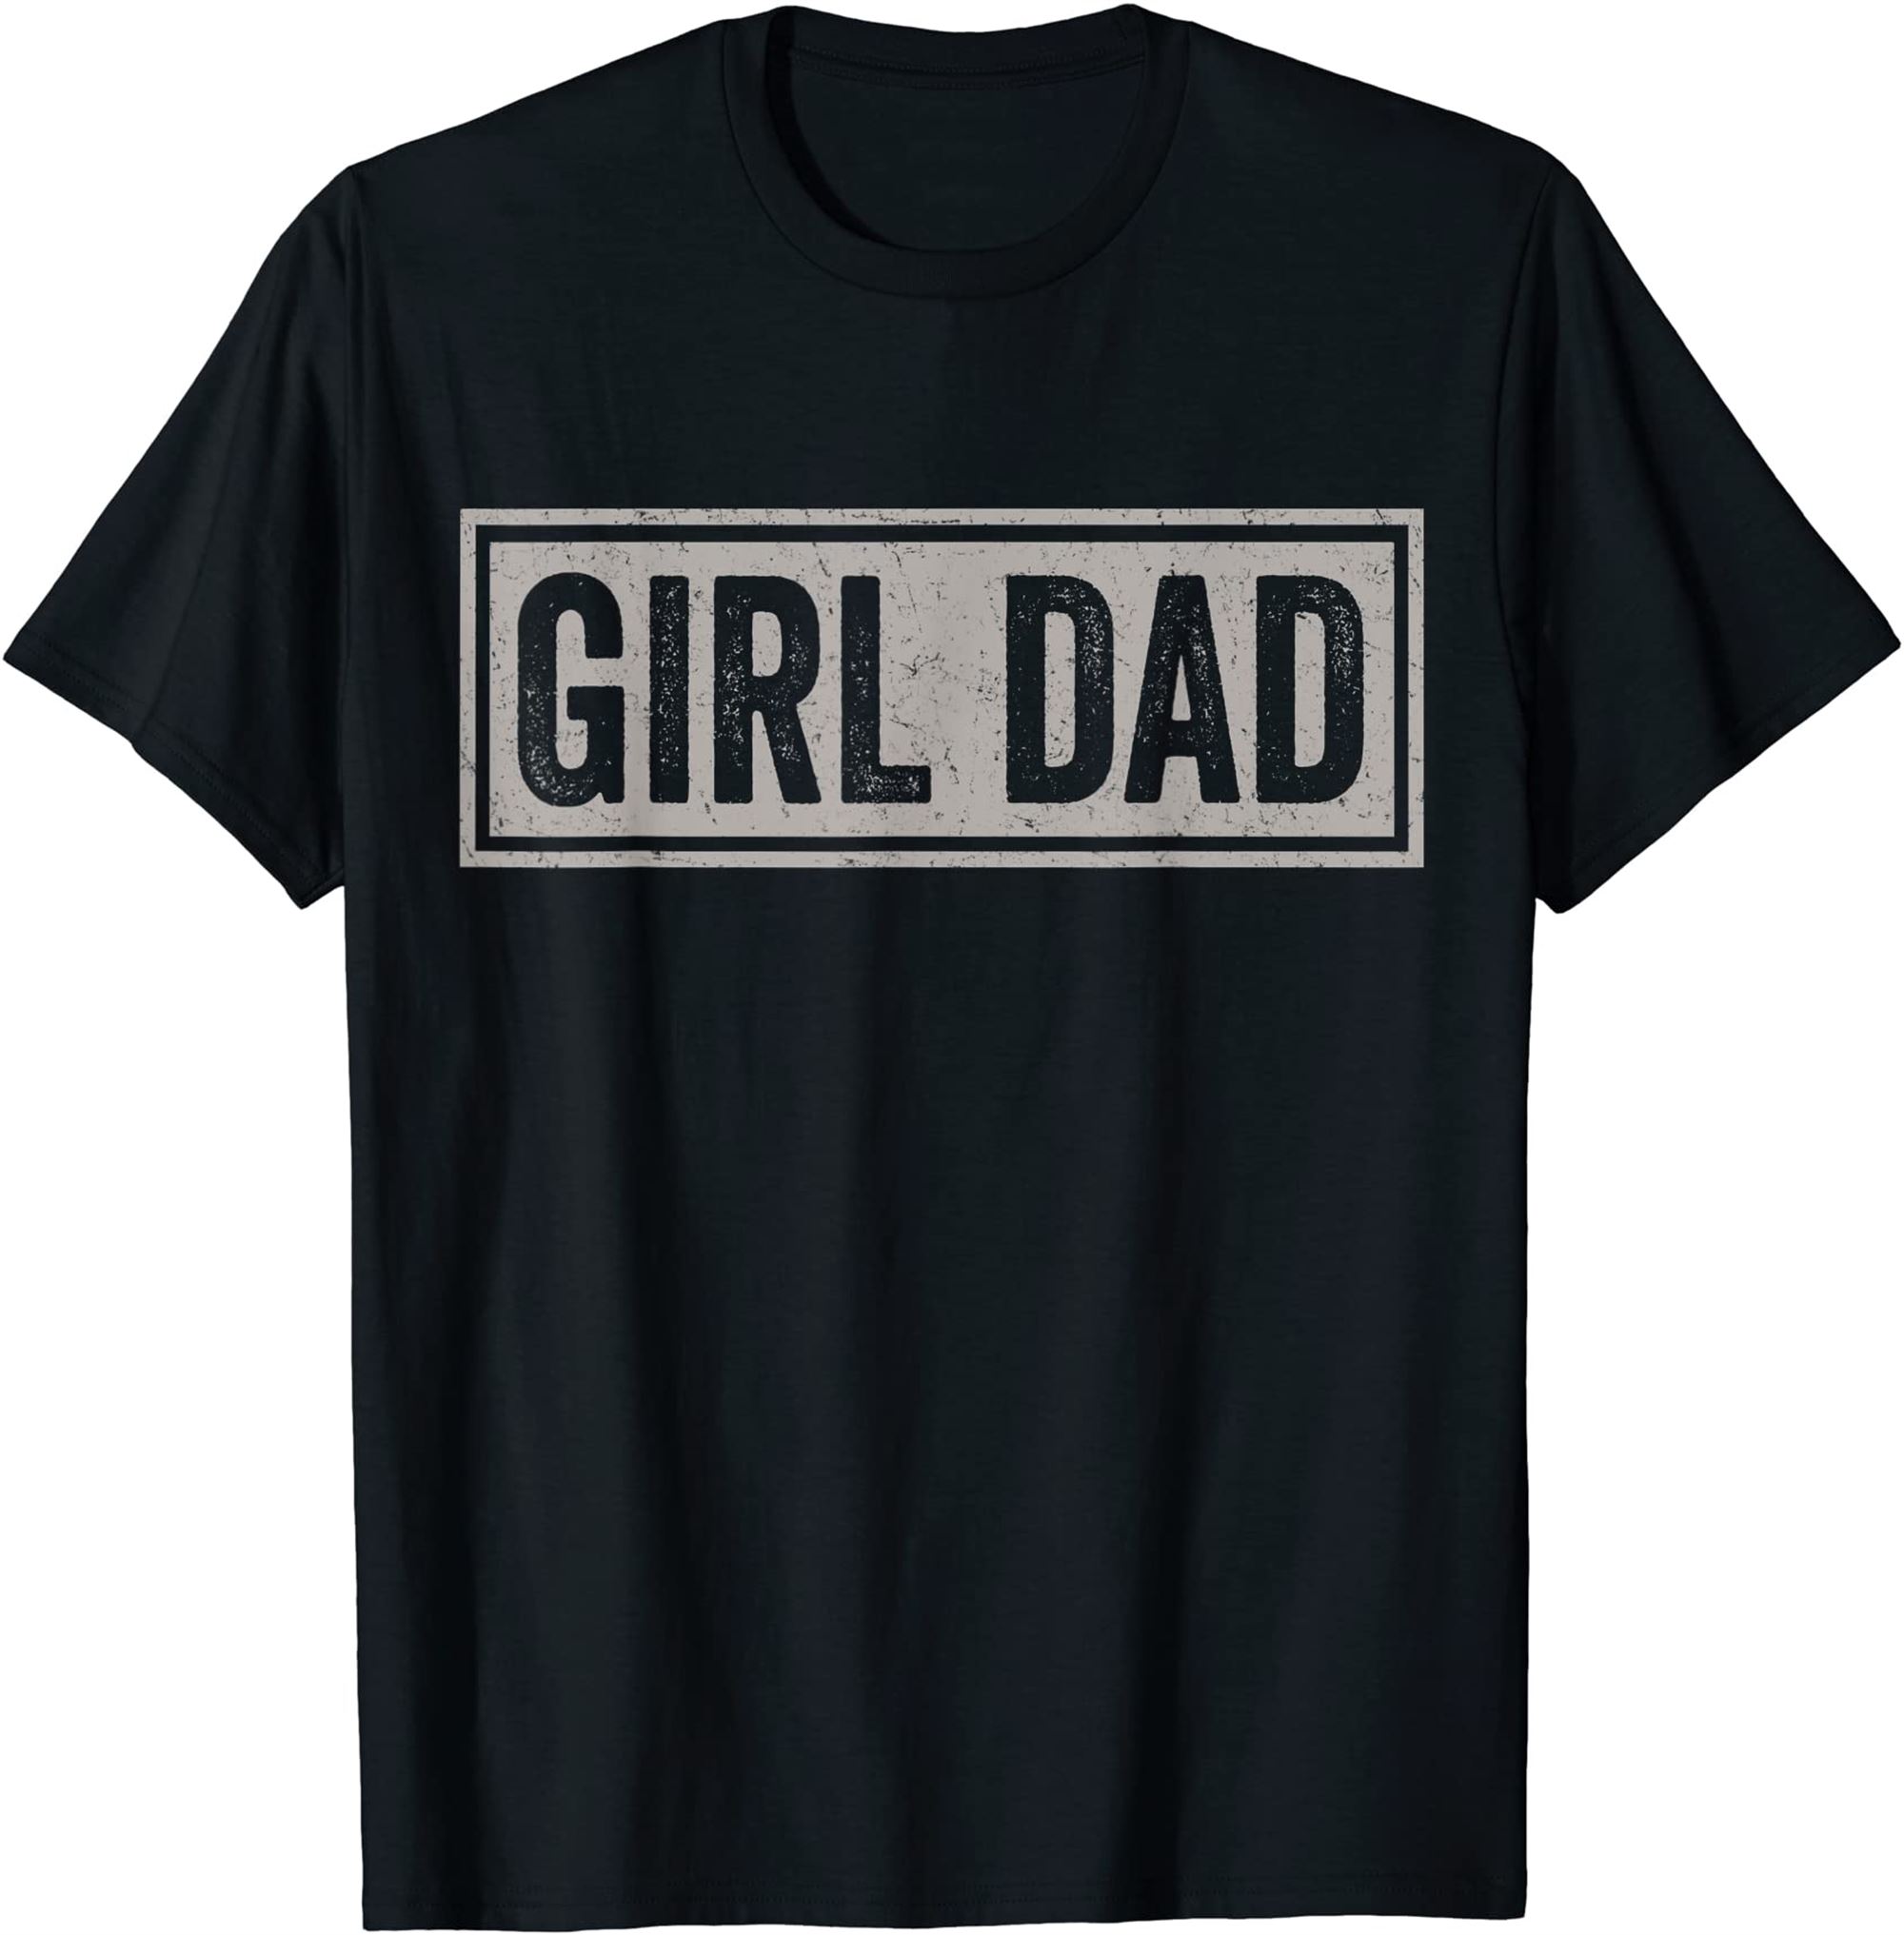 Girl Dad Shirt For Men Vintage Proud Father Of Girl Dad T-shirt Plus Size Up To 5xl